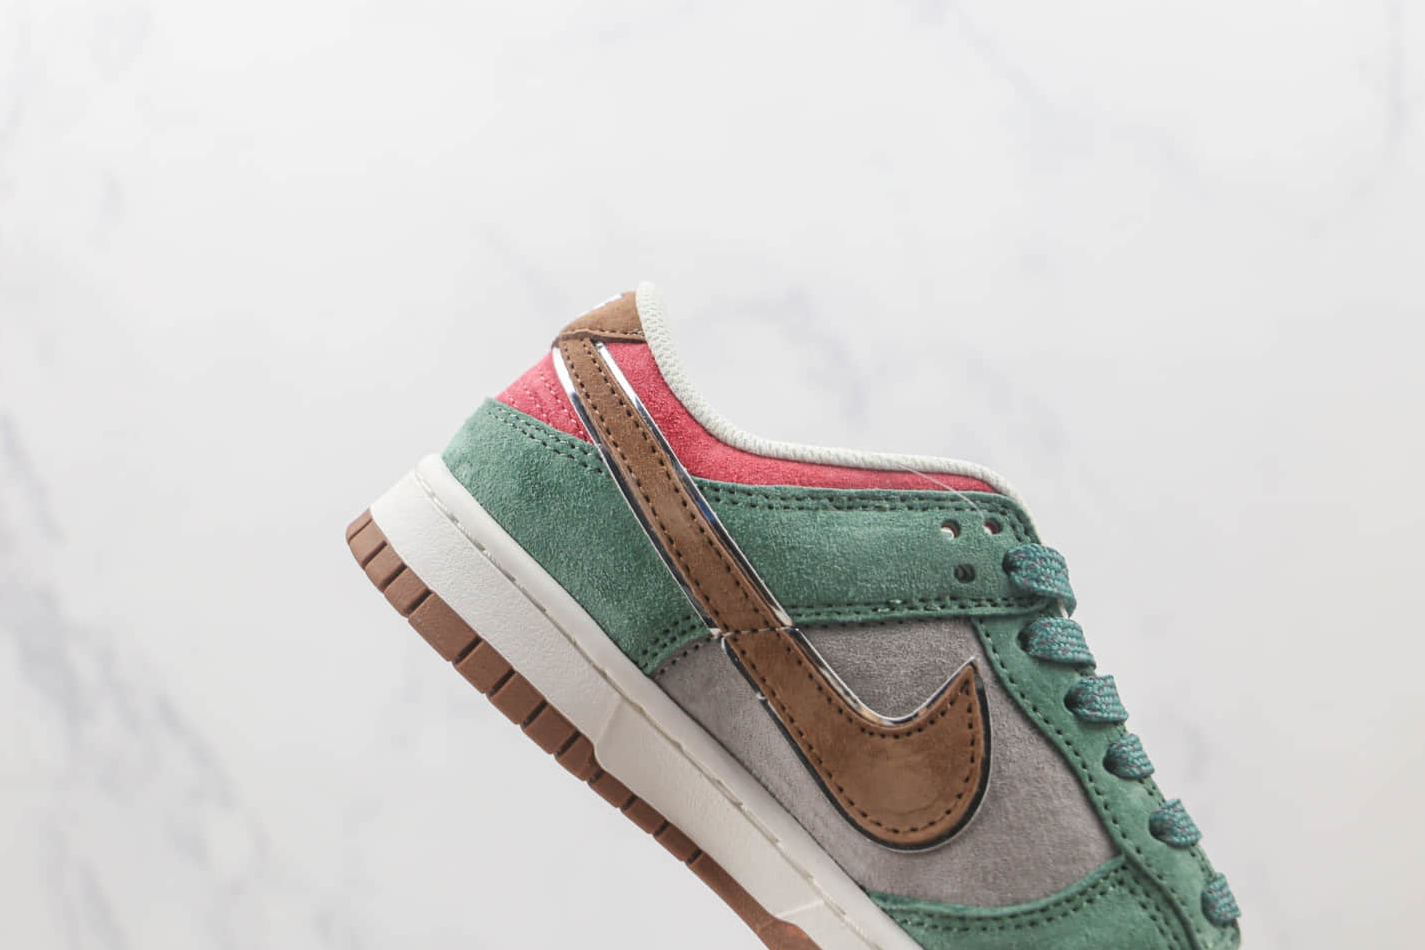 Otomo Katsuhiro x Nike SB Dunk Low Steamboy OST Green Red Brown ST1391-203: A Limited Edition Collaboration for Sneaker Enthusiasts